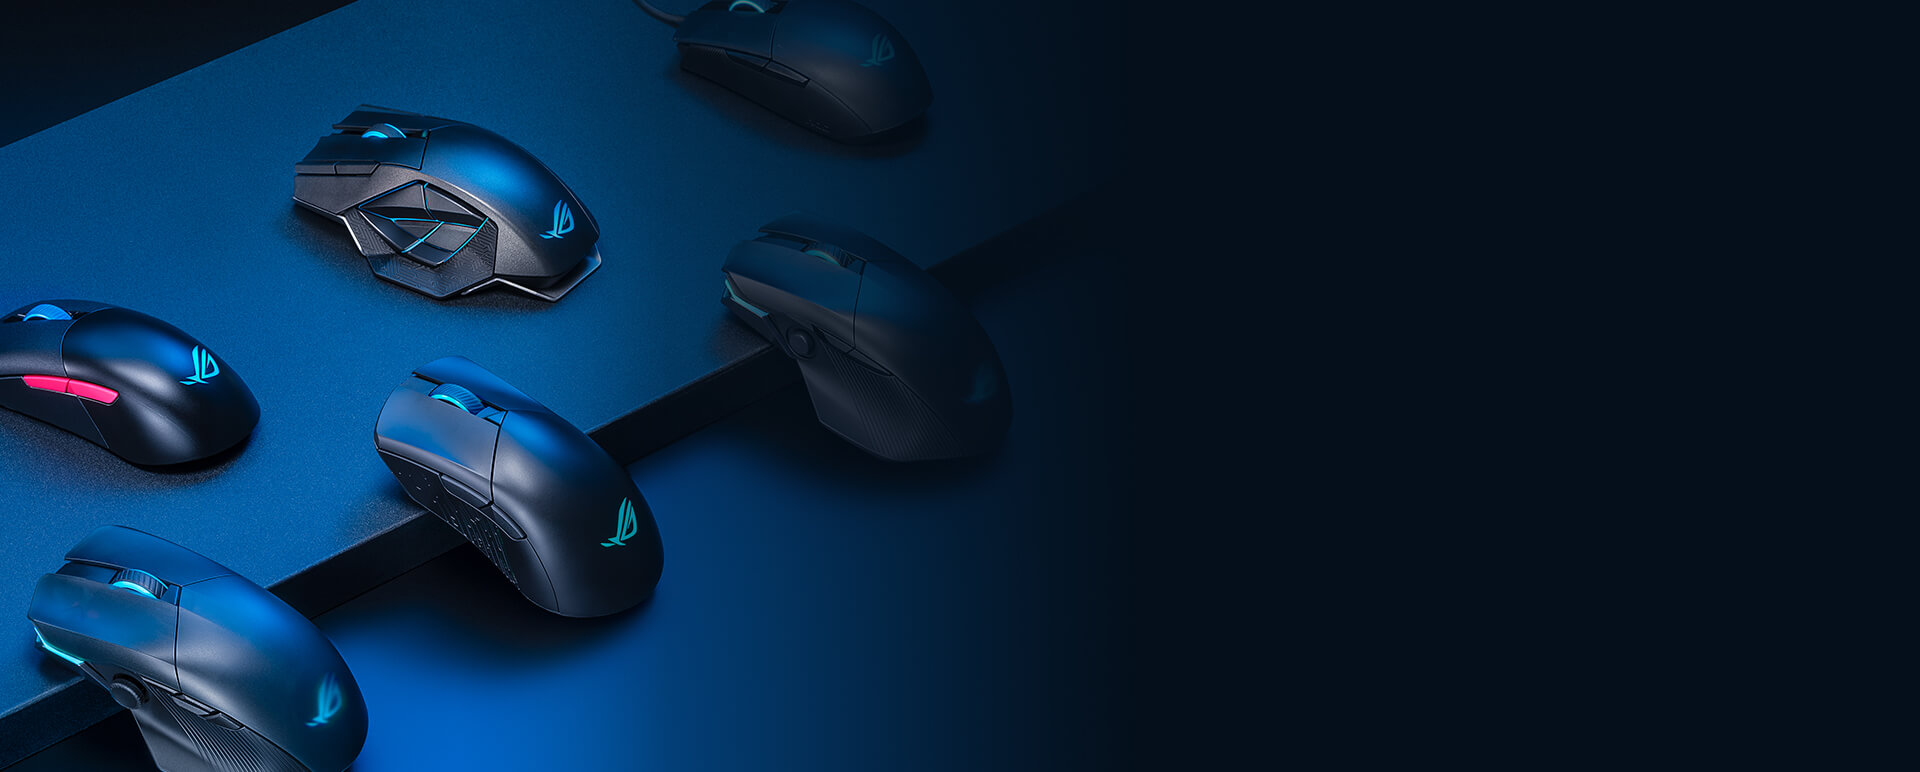 An image of the ROG mouse lineup, each mouse offering unique handshape designs catered to different needs.